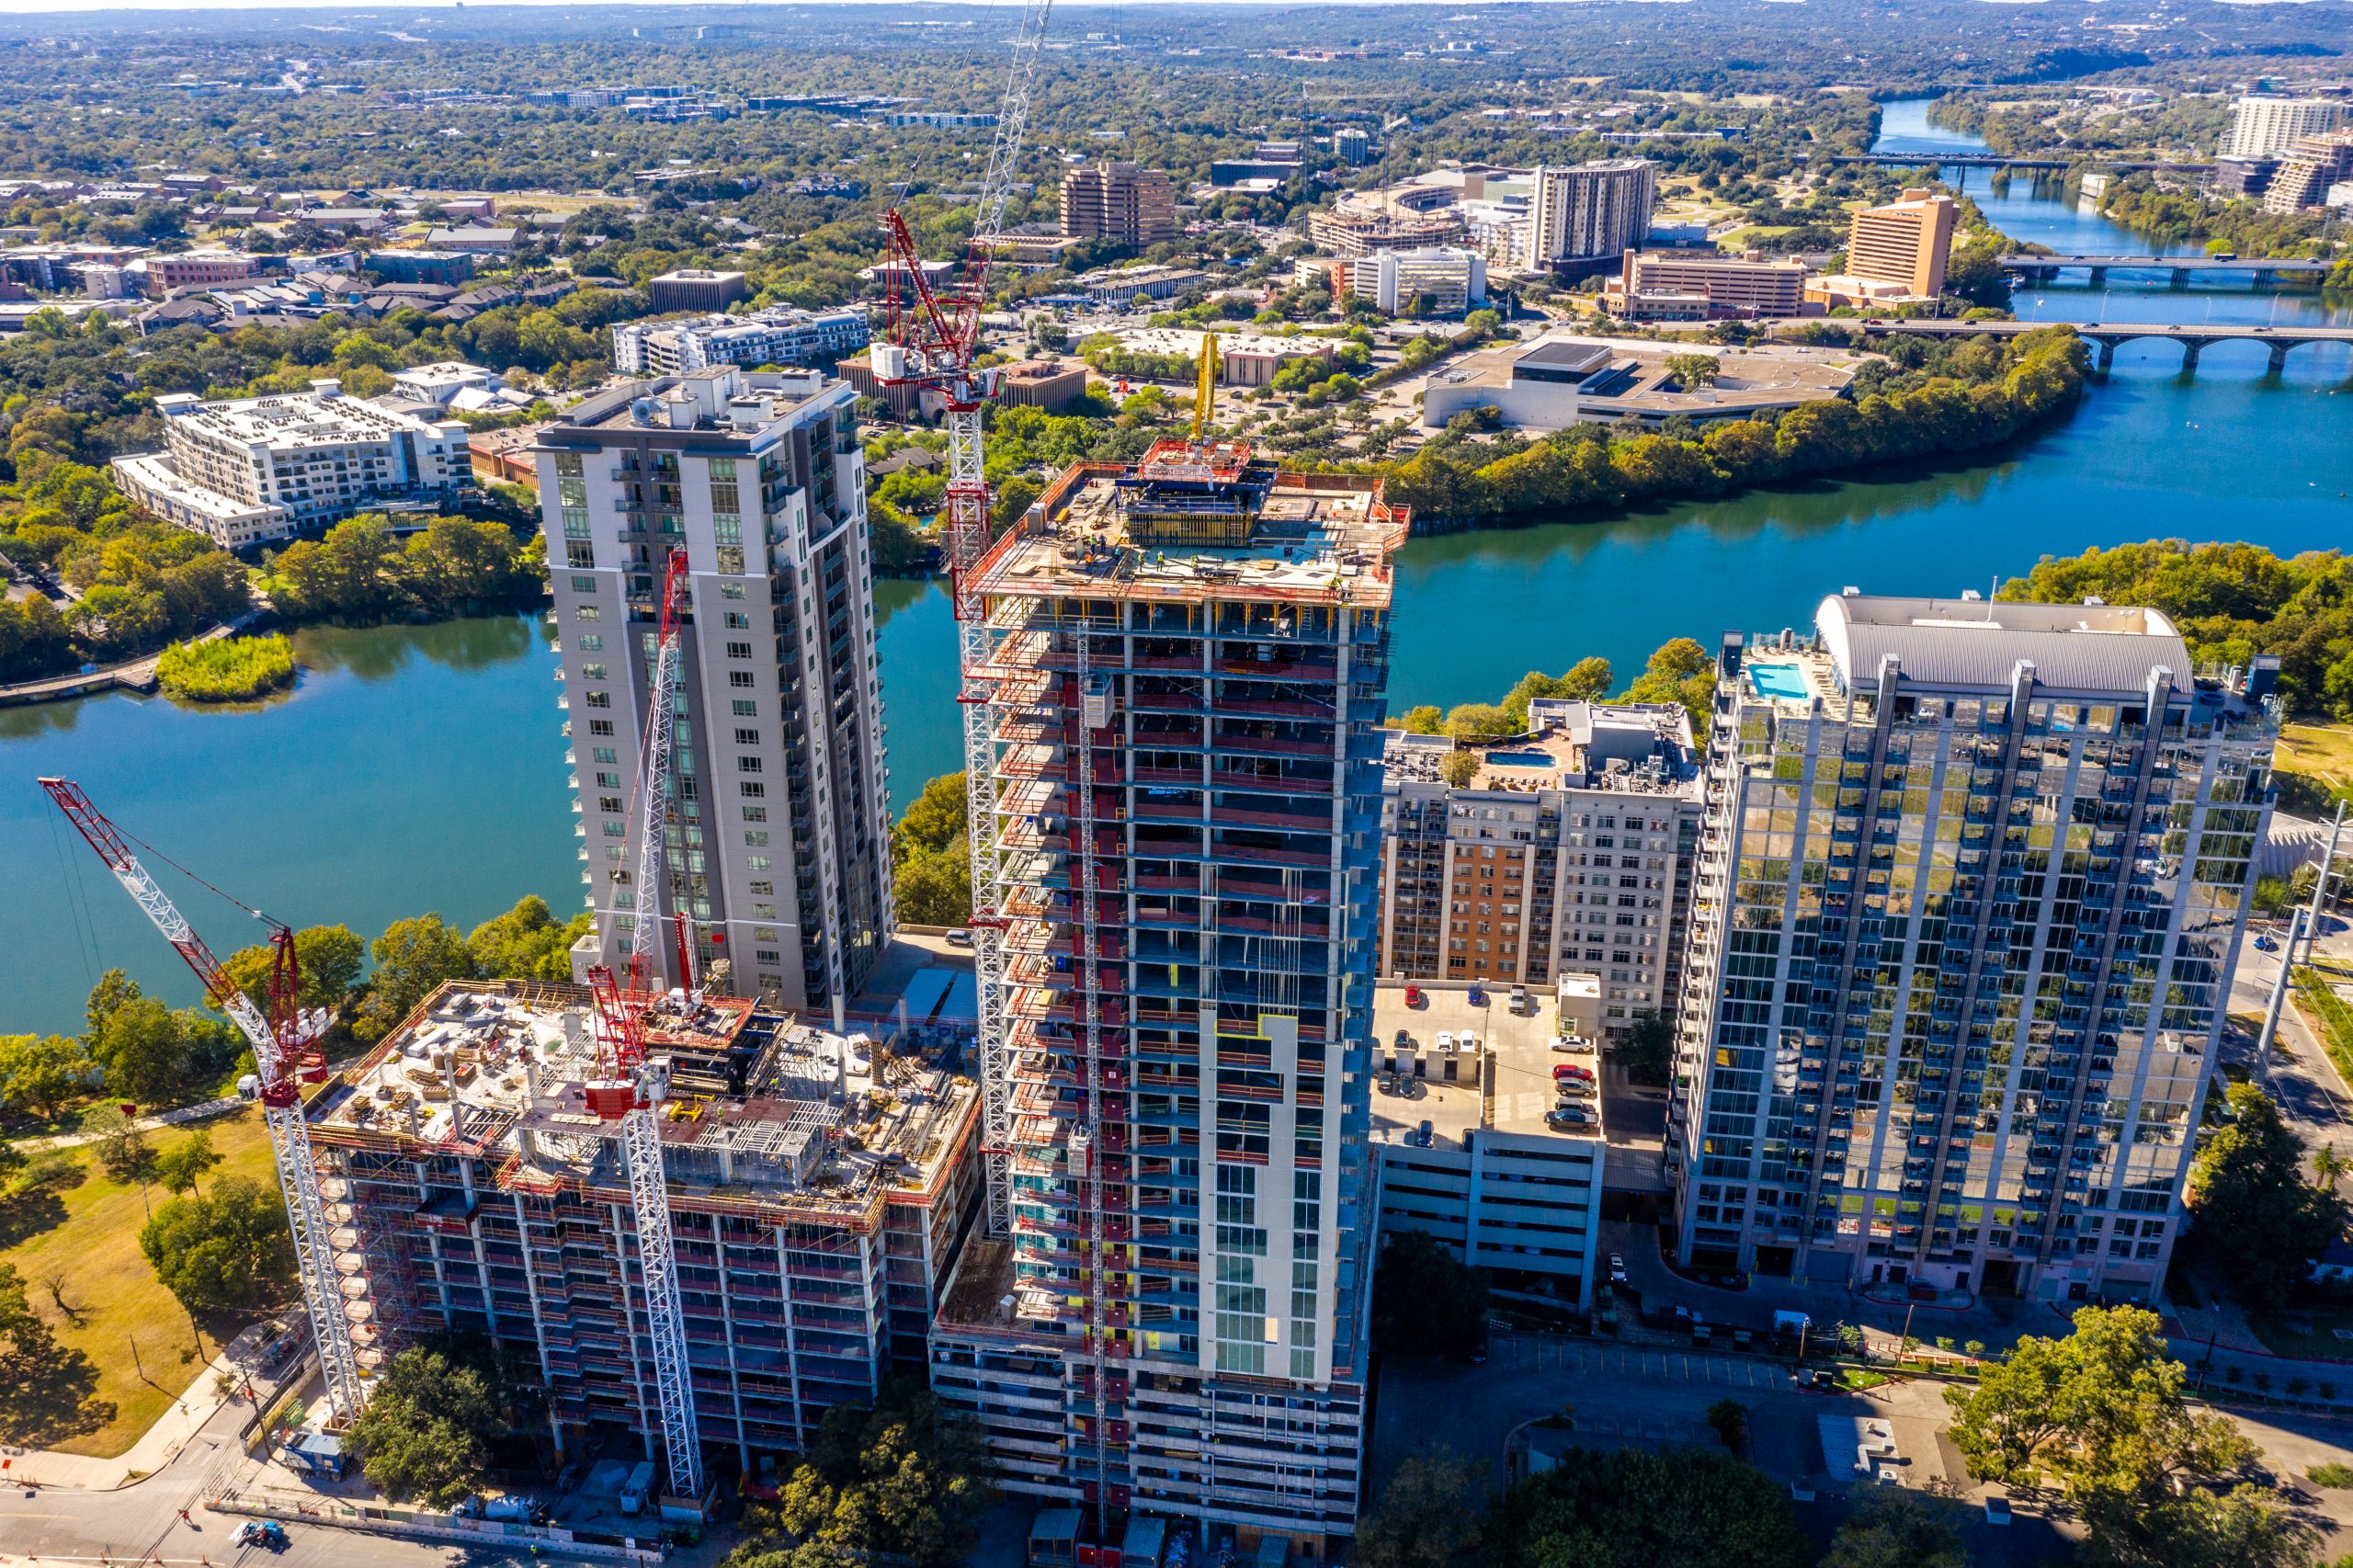 Square Foot Photography's drone photography as a commercial real estate marketing tool